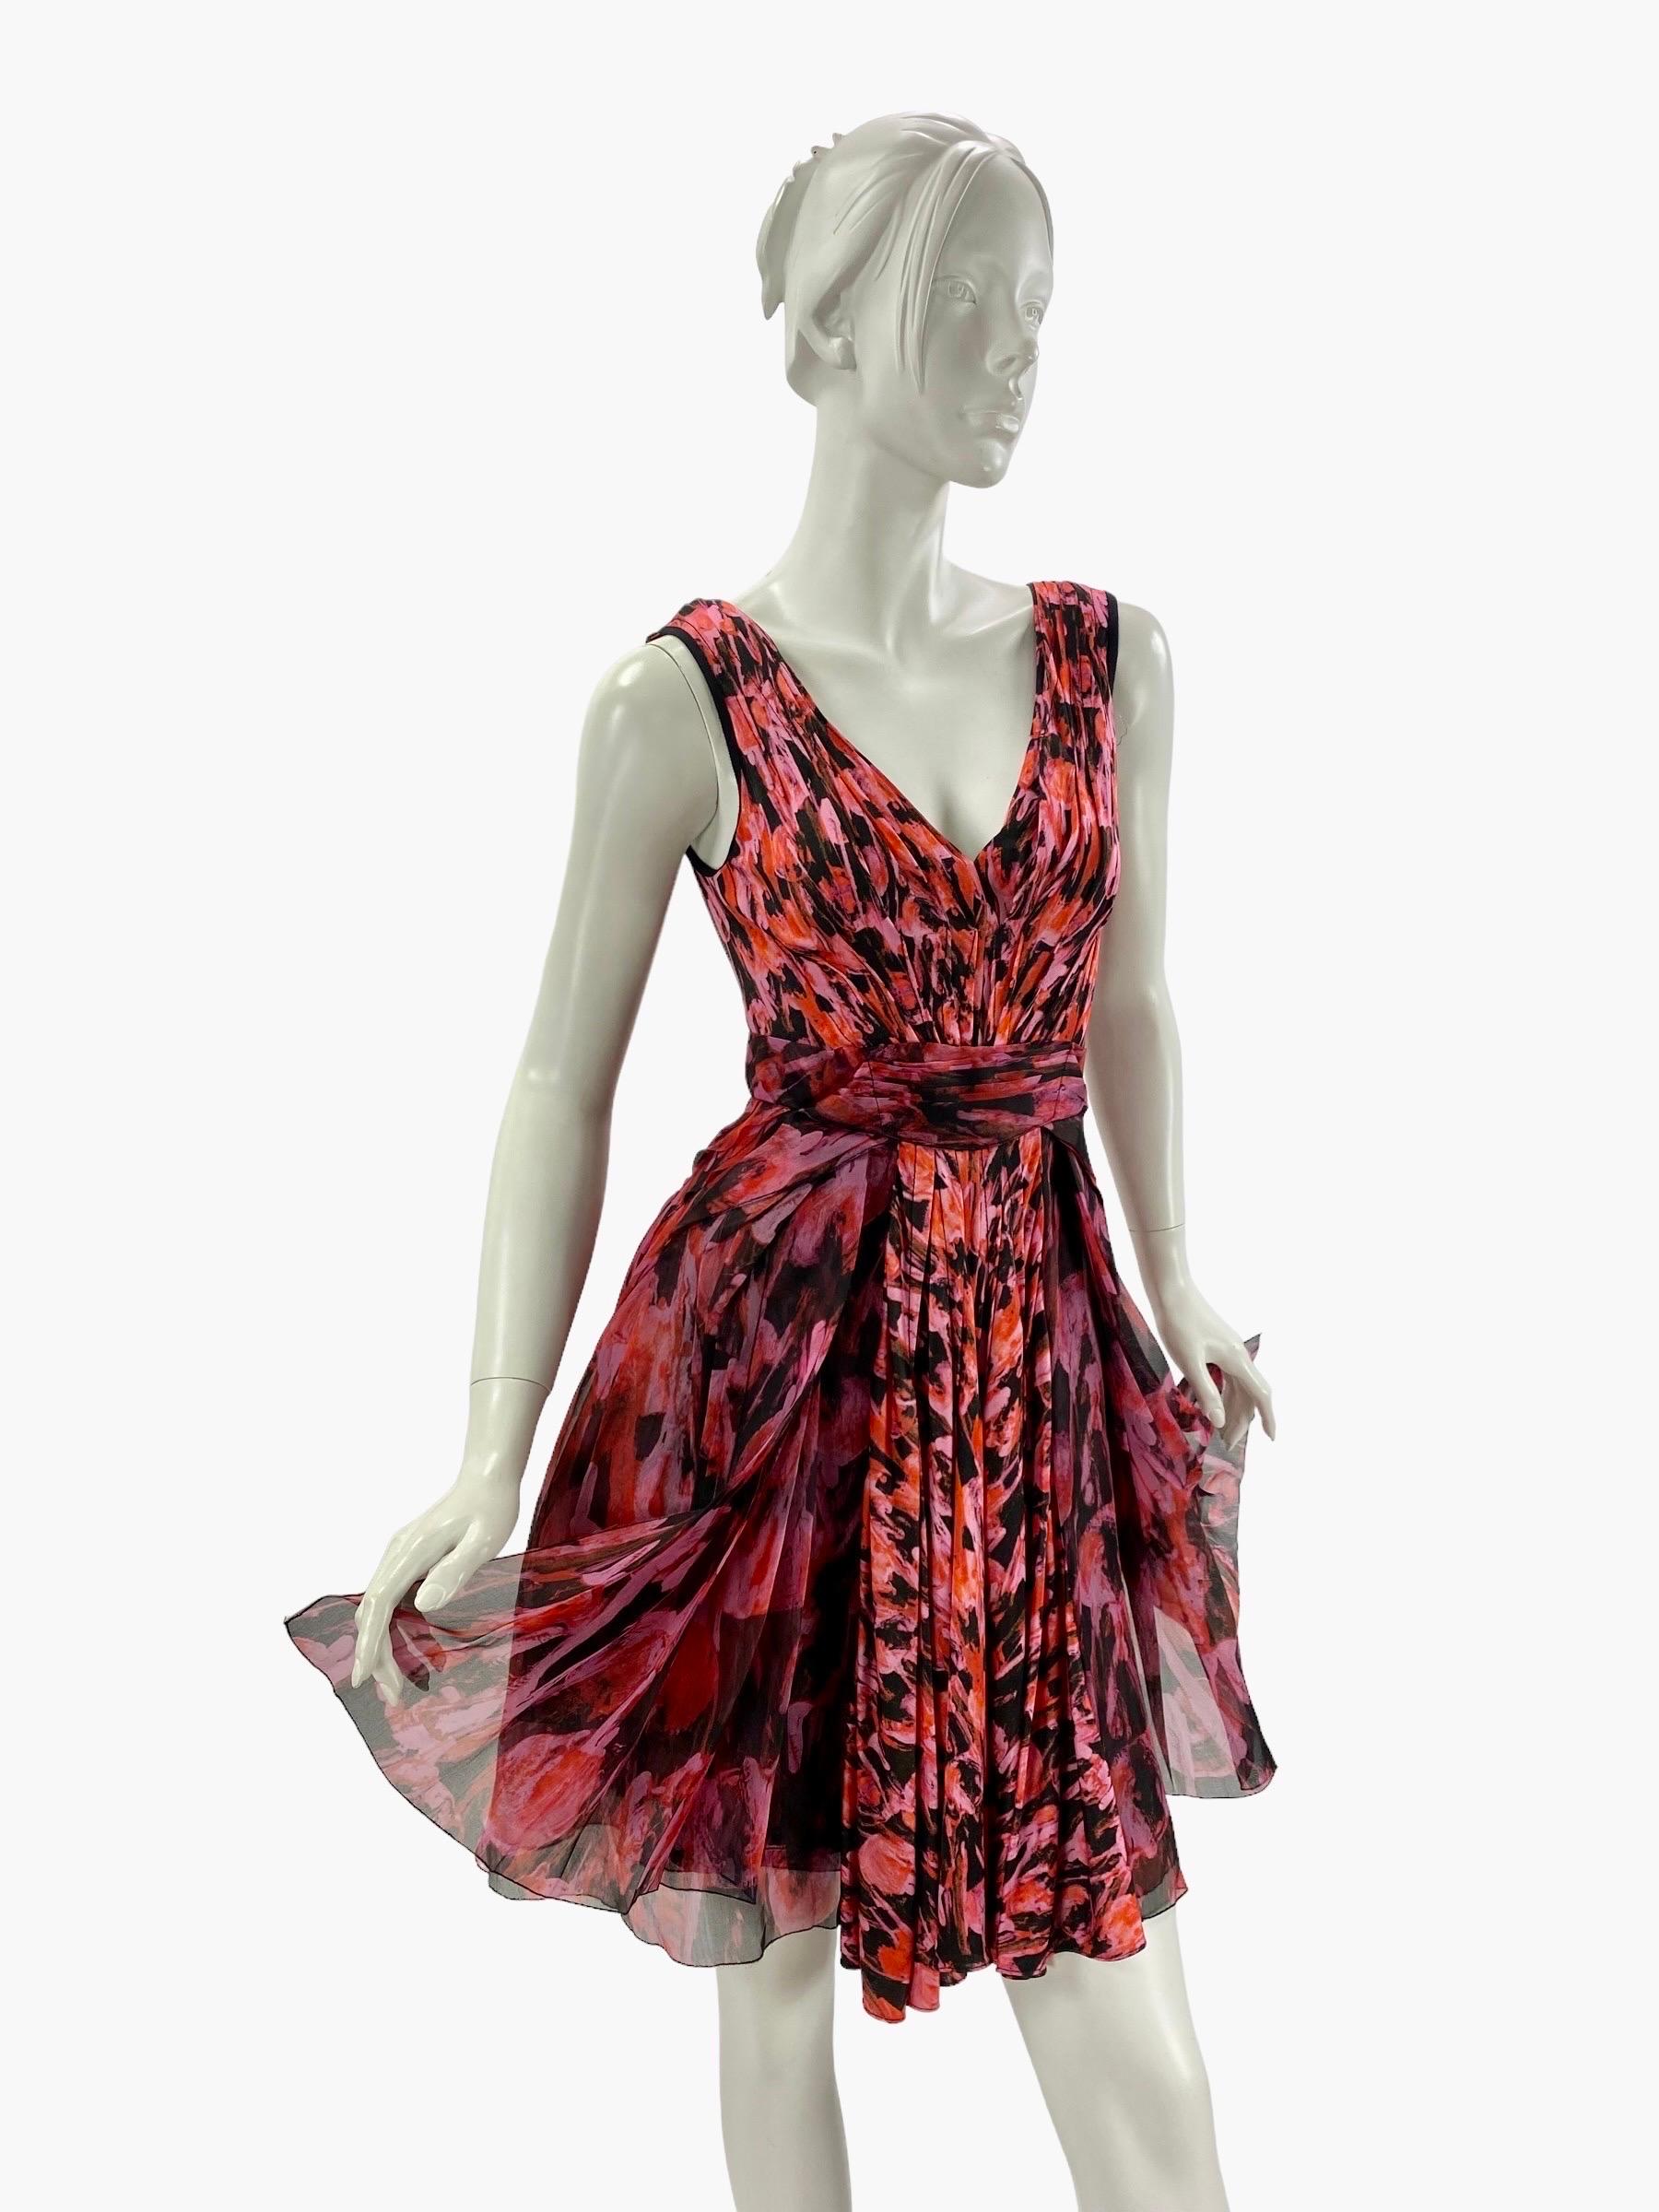 Zac Posen Floral Print Pink Dress
Designer size 6
Jersey with chiffon, Double-layered skirt, Fully lined, Back zip closure.
Measurements: Length - 36 inches, Bust - 32/34